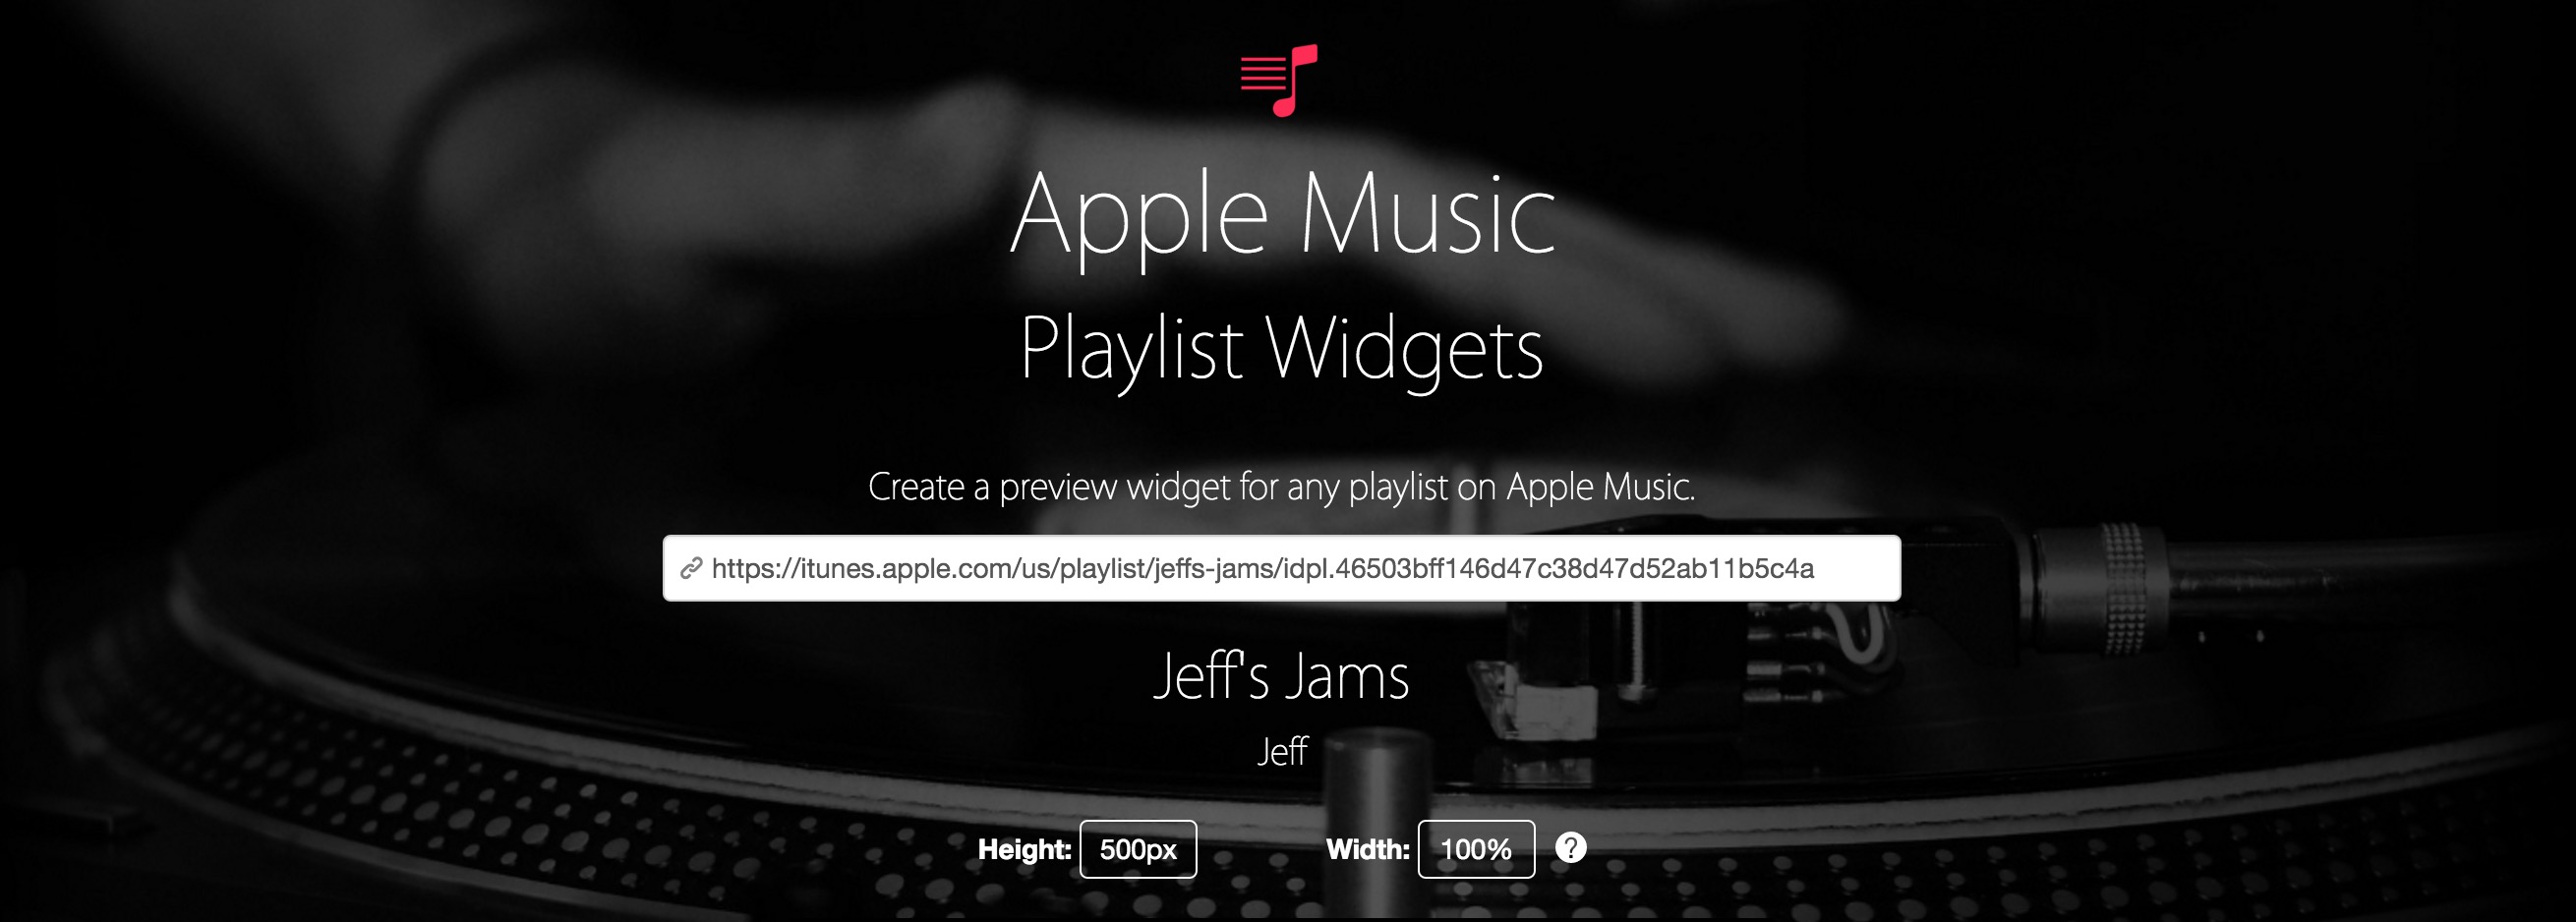 How To Create An Apple Music Playlist Preview Widget 9to5mac